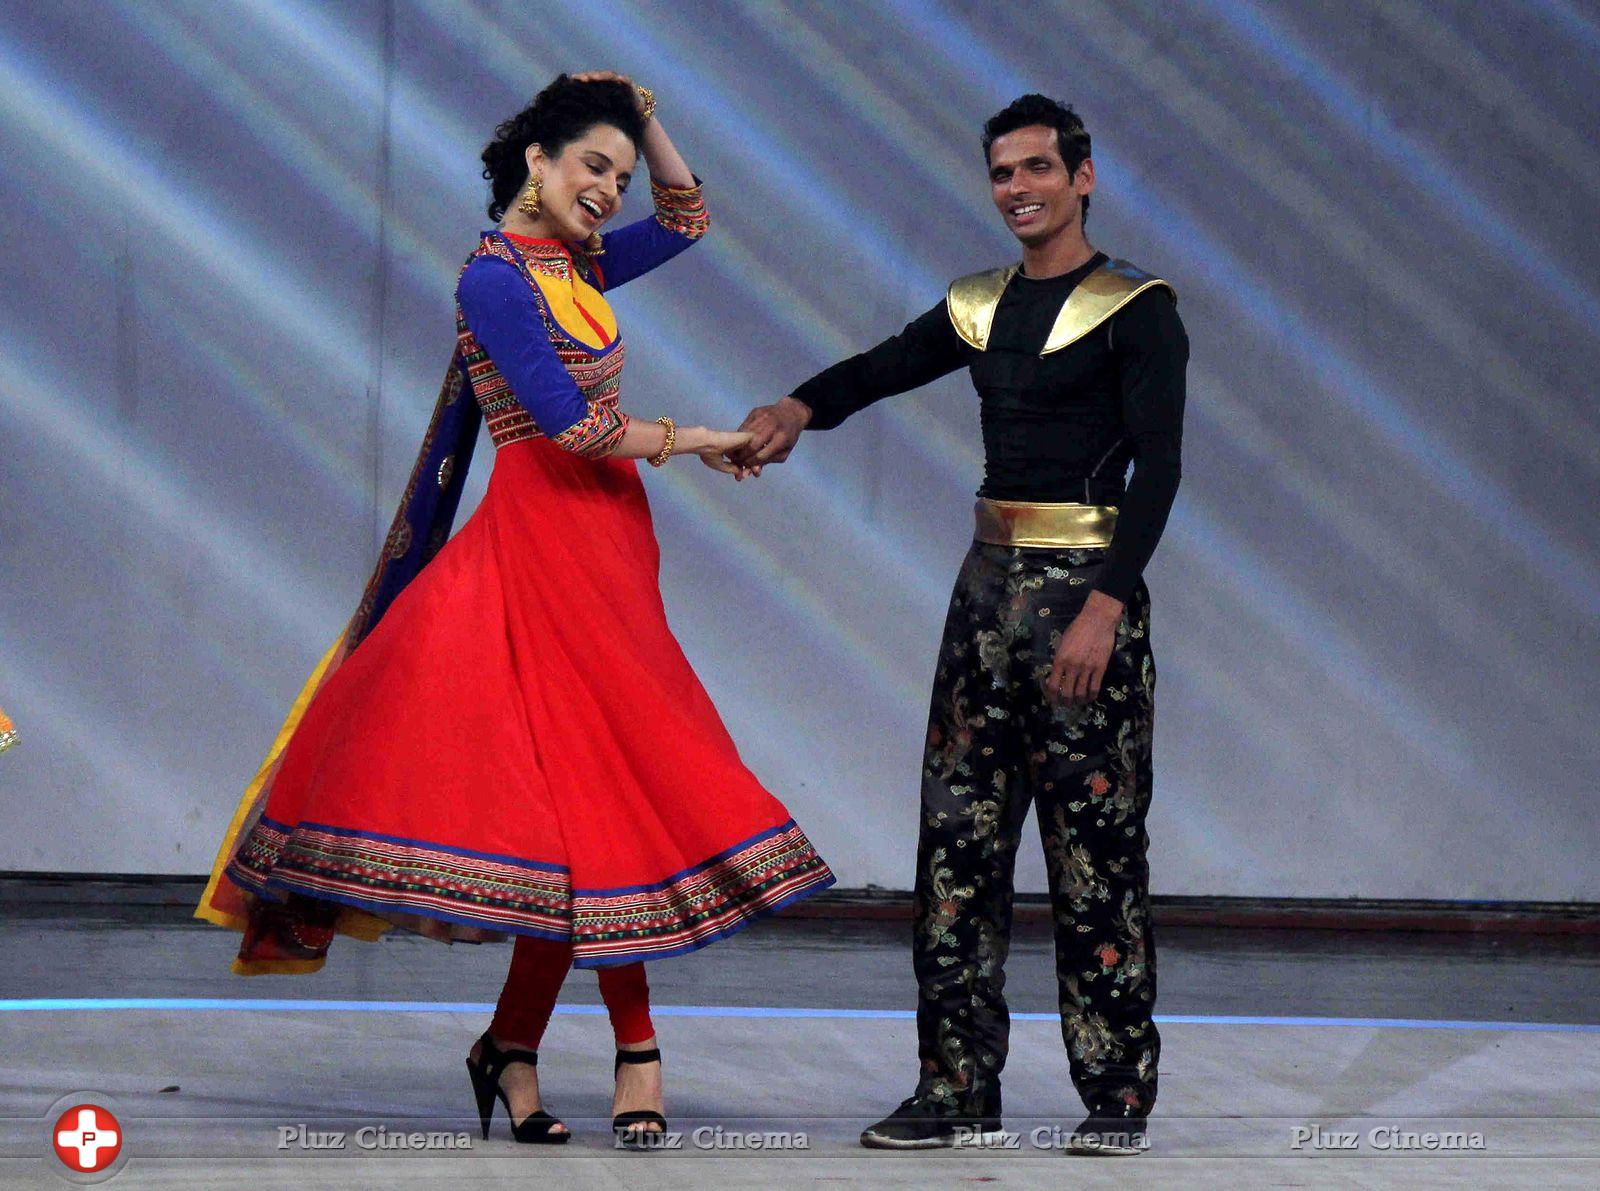 Kangana Ranaut - Promotion of film Queen on sets of Indias Got Talent Season 5 Photos | Picture 717415